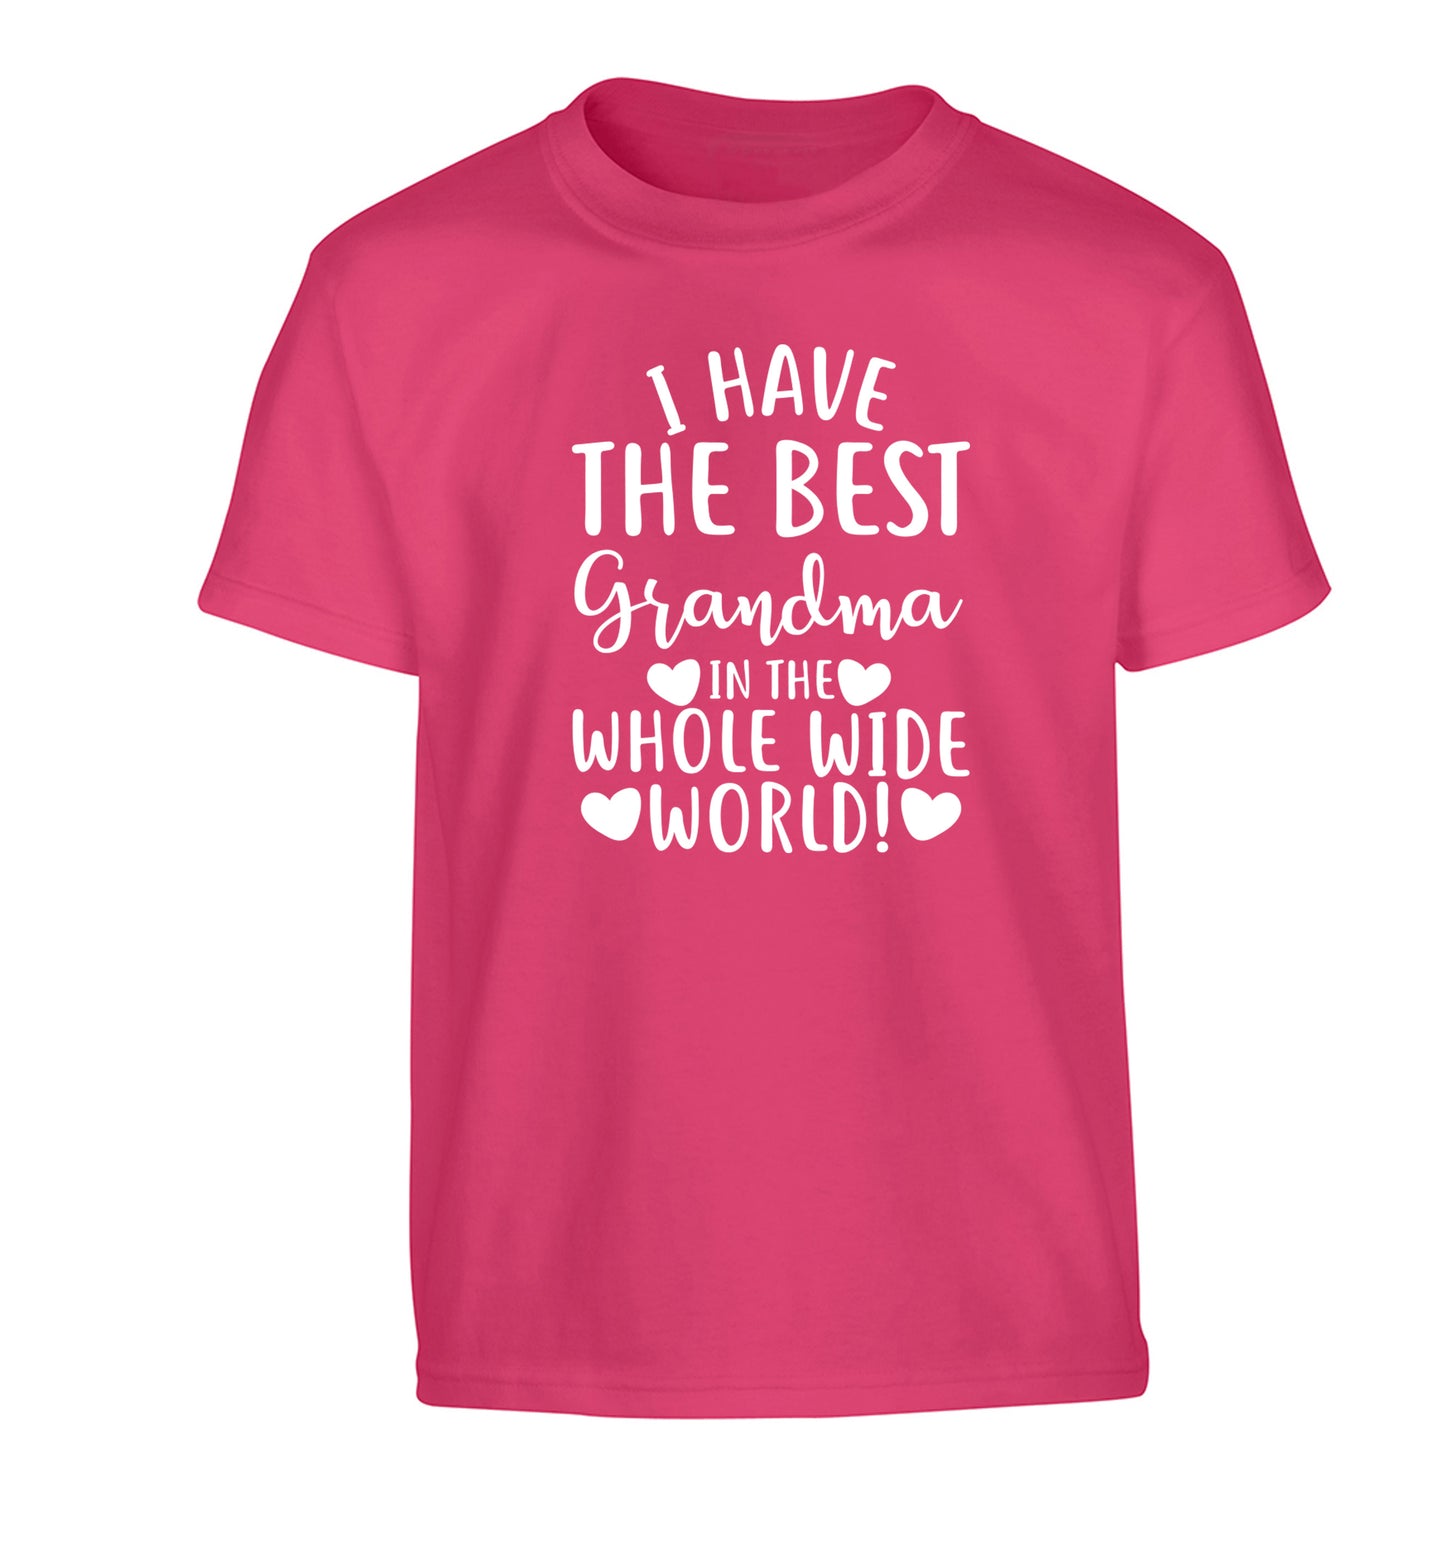 I have the best grandma in the whole wide world! Children's pink Tshirt 12-13 Years